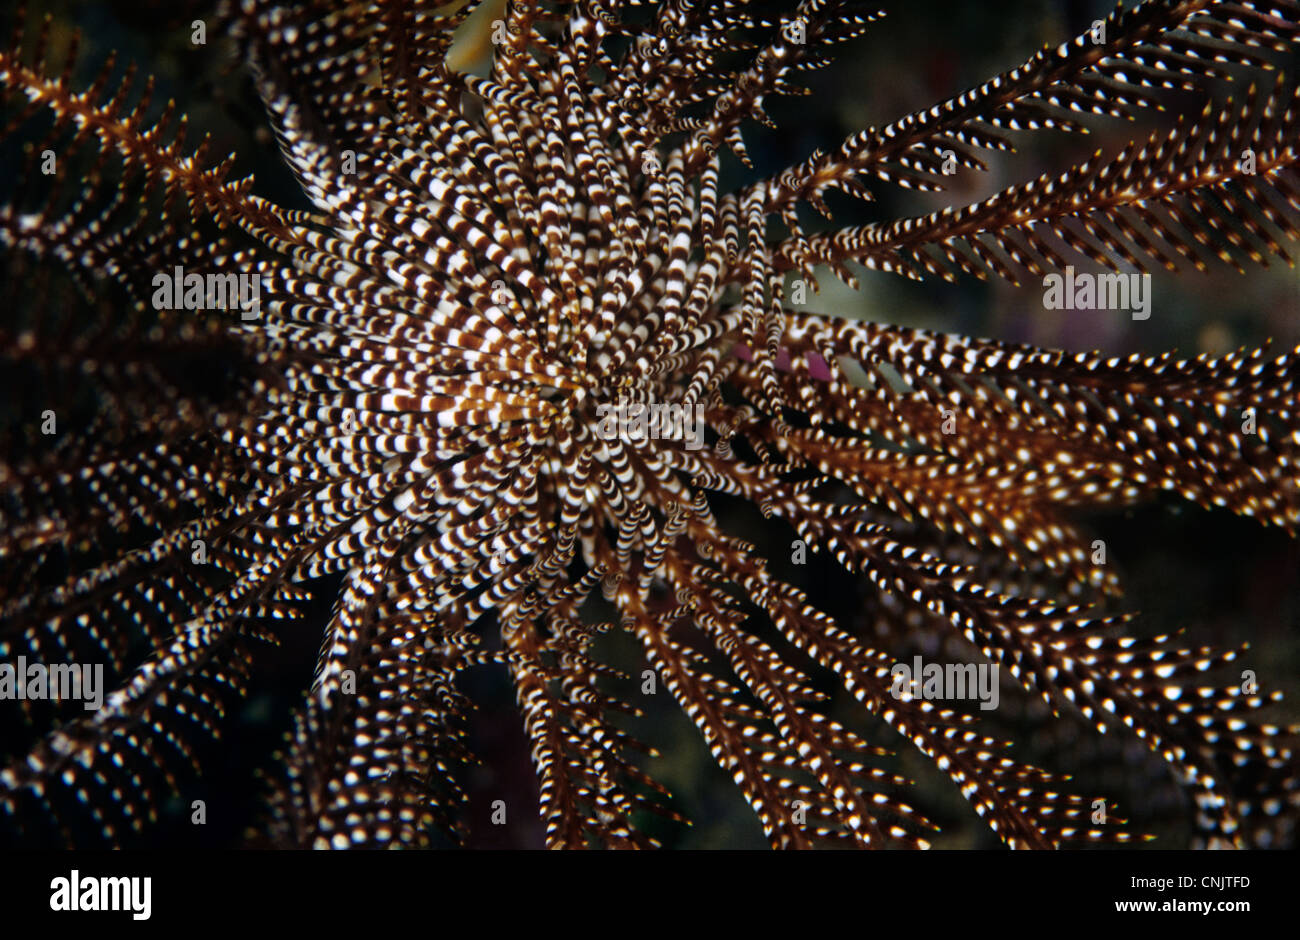 Feather star, Comastheria sp., central disk with mouth opening. Stock Photo